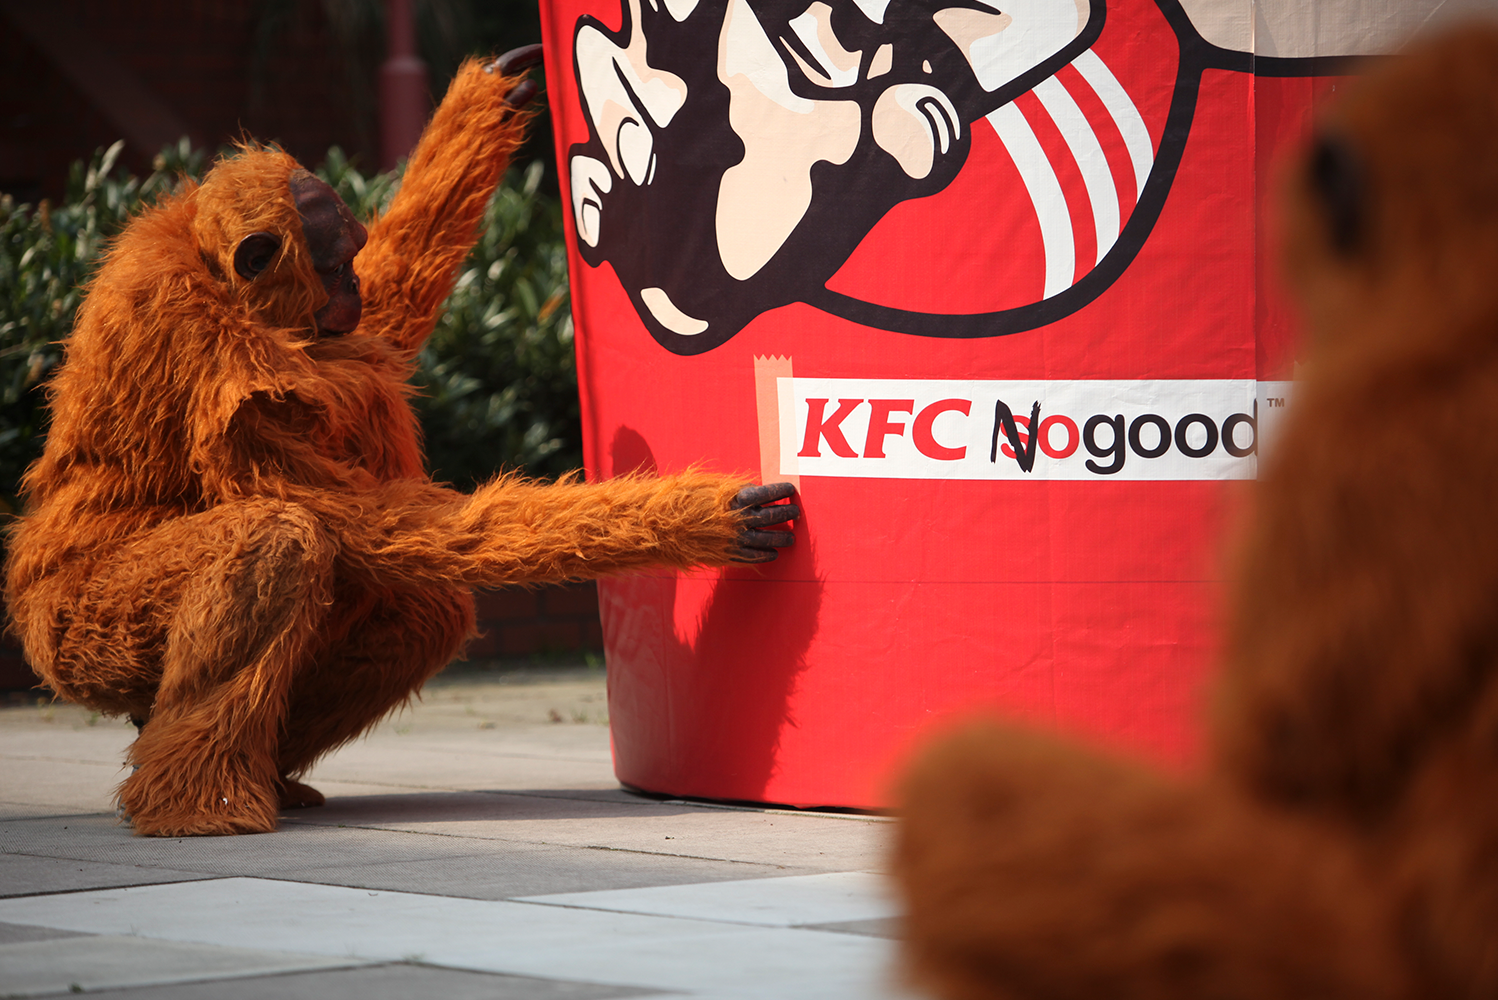 Campaign_Greenpeace_Forests_KFC_NoGood.png